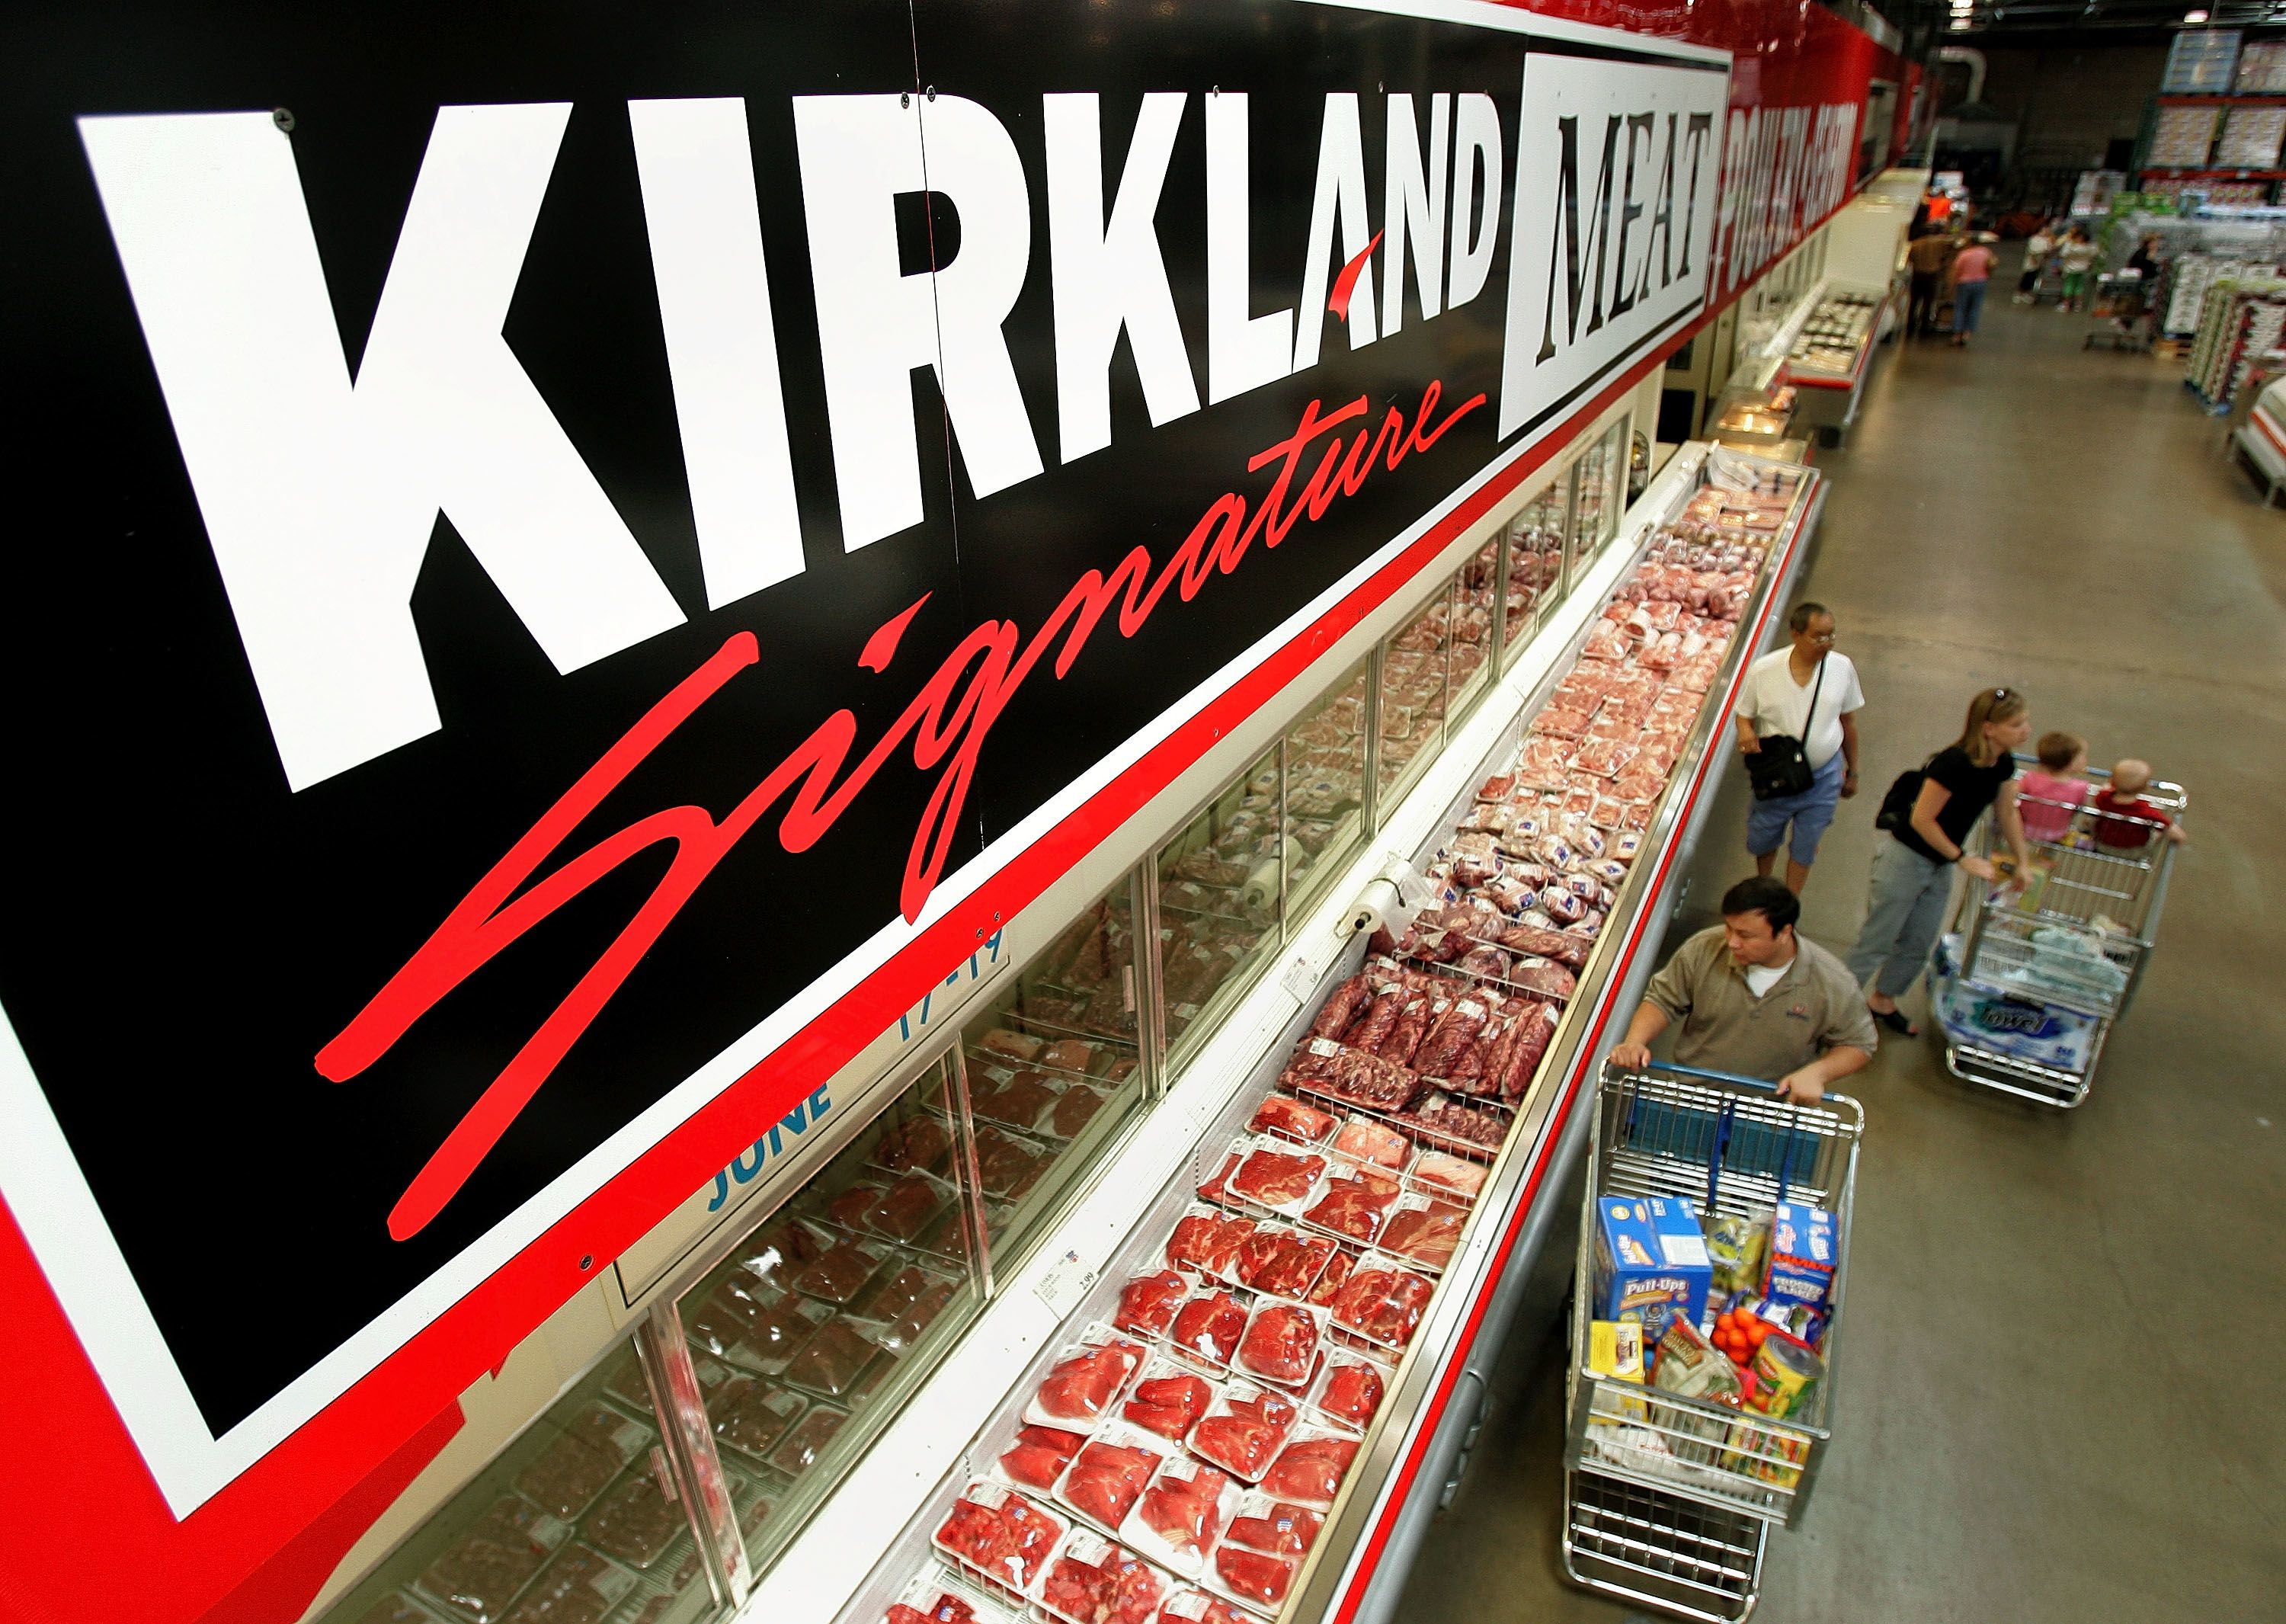 Costco Wholesale Canada - Kirkland Signature is more than just a brand - it  stands for great value on quality products. Shop Kirkland Signature  products at your local warehouse and on Costco.ca.